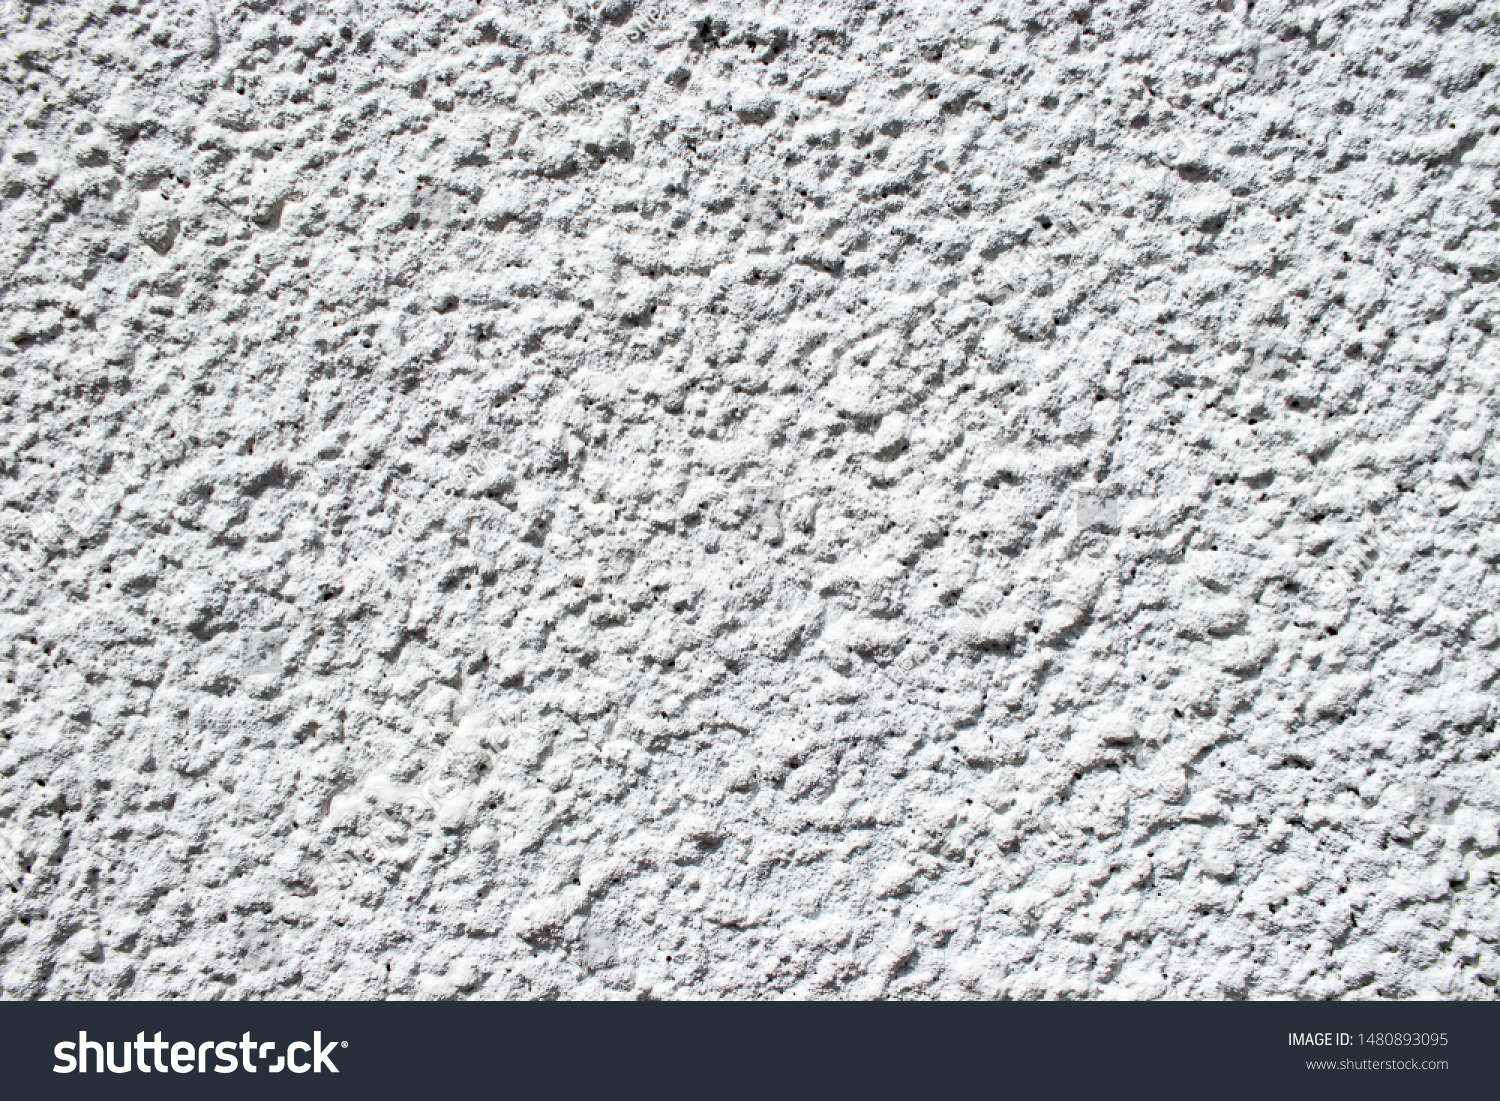 White stucco concrete wall surface texture background surface grunge grit detail #1480893095